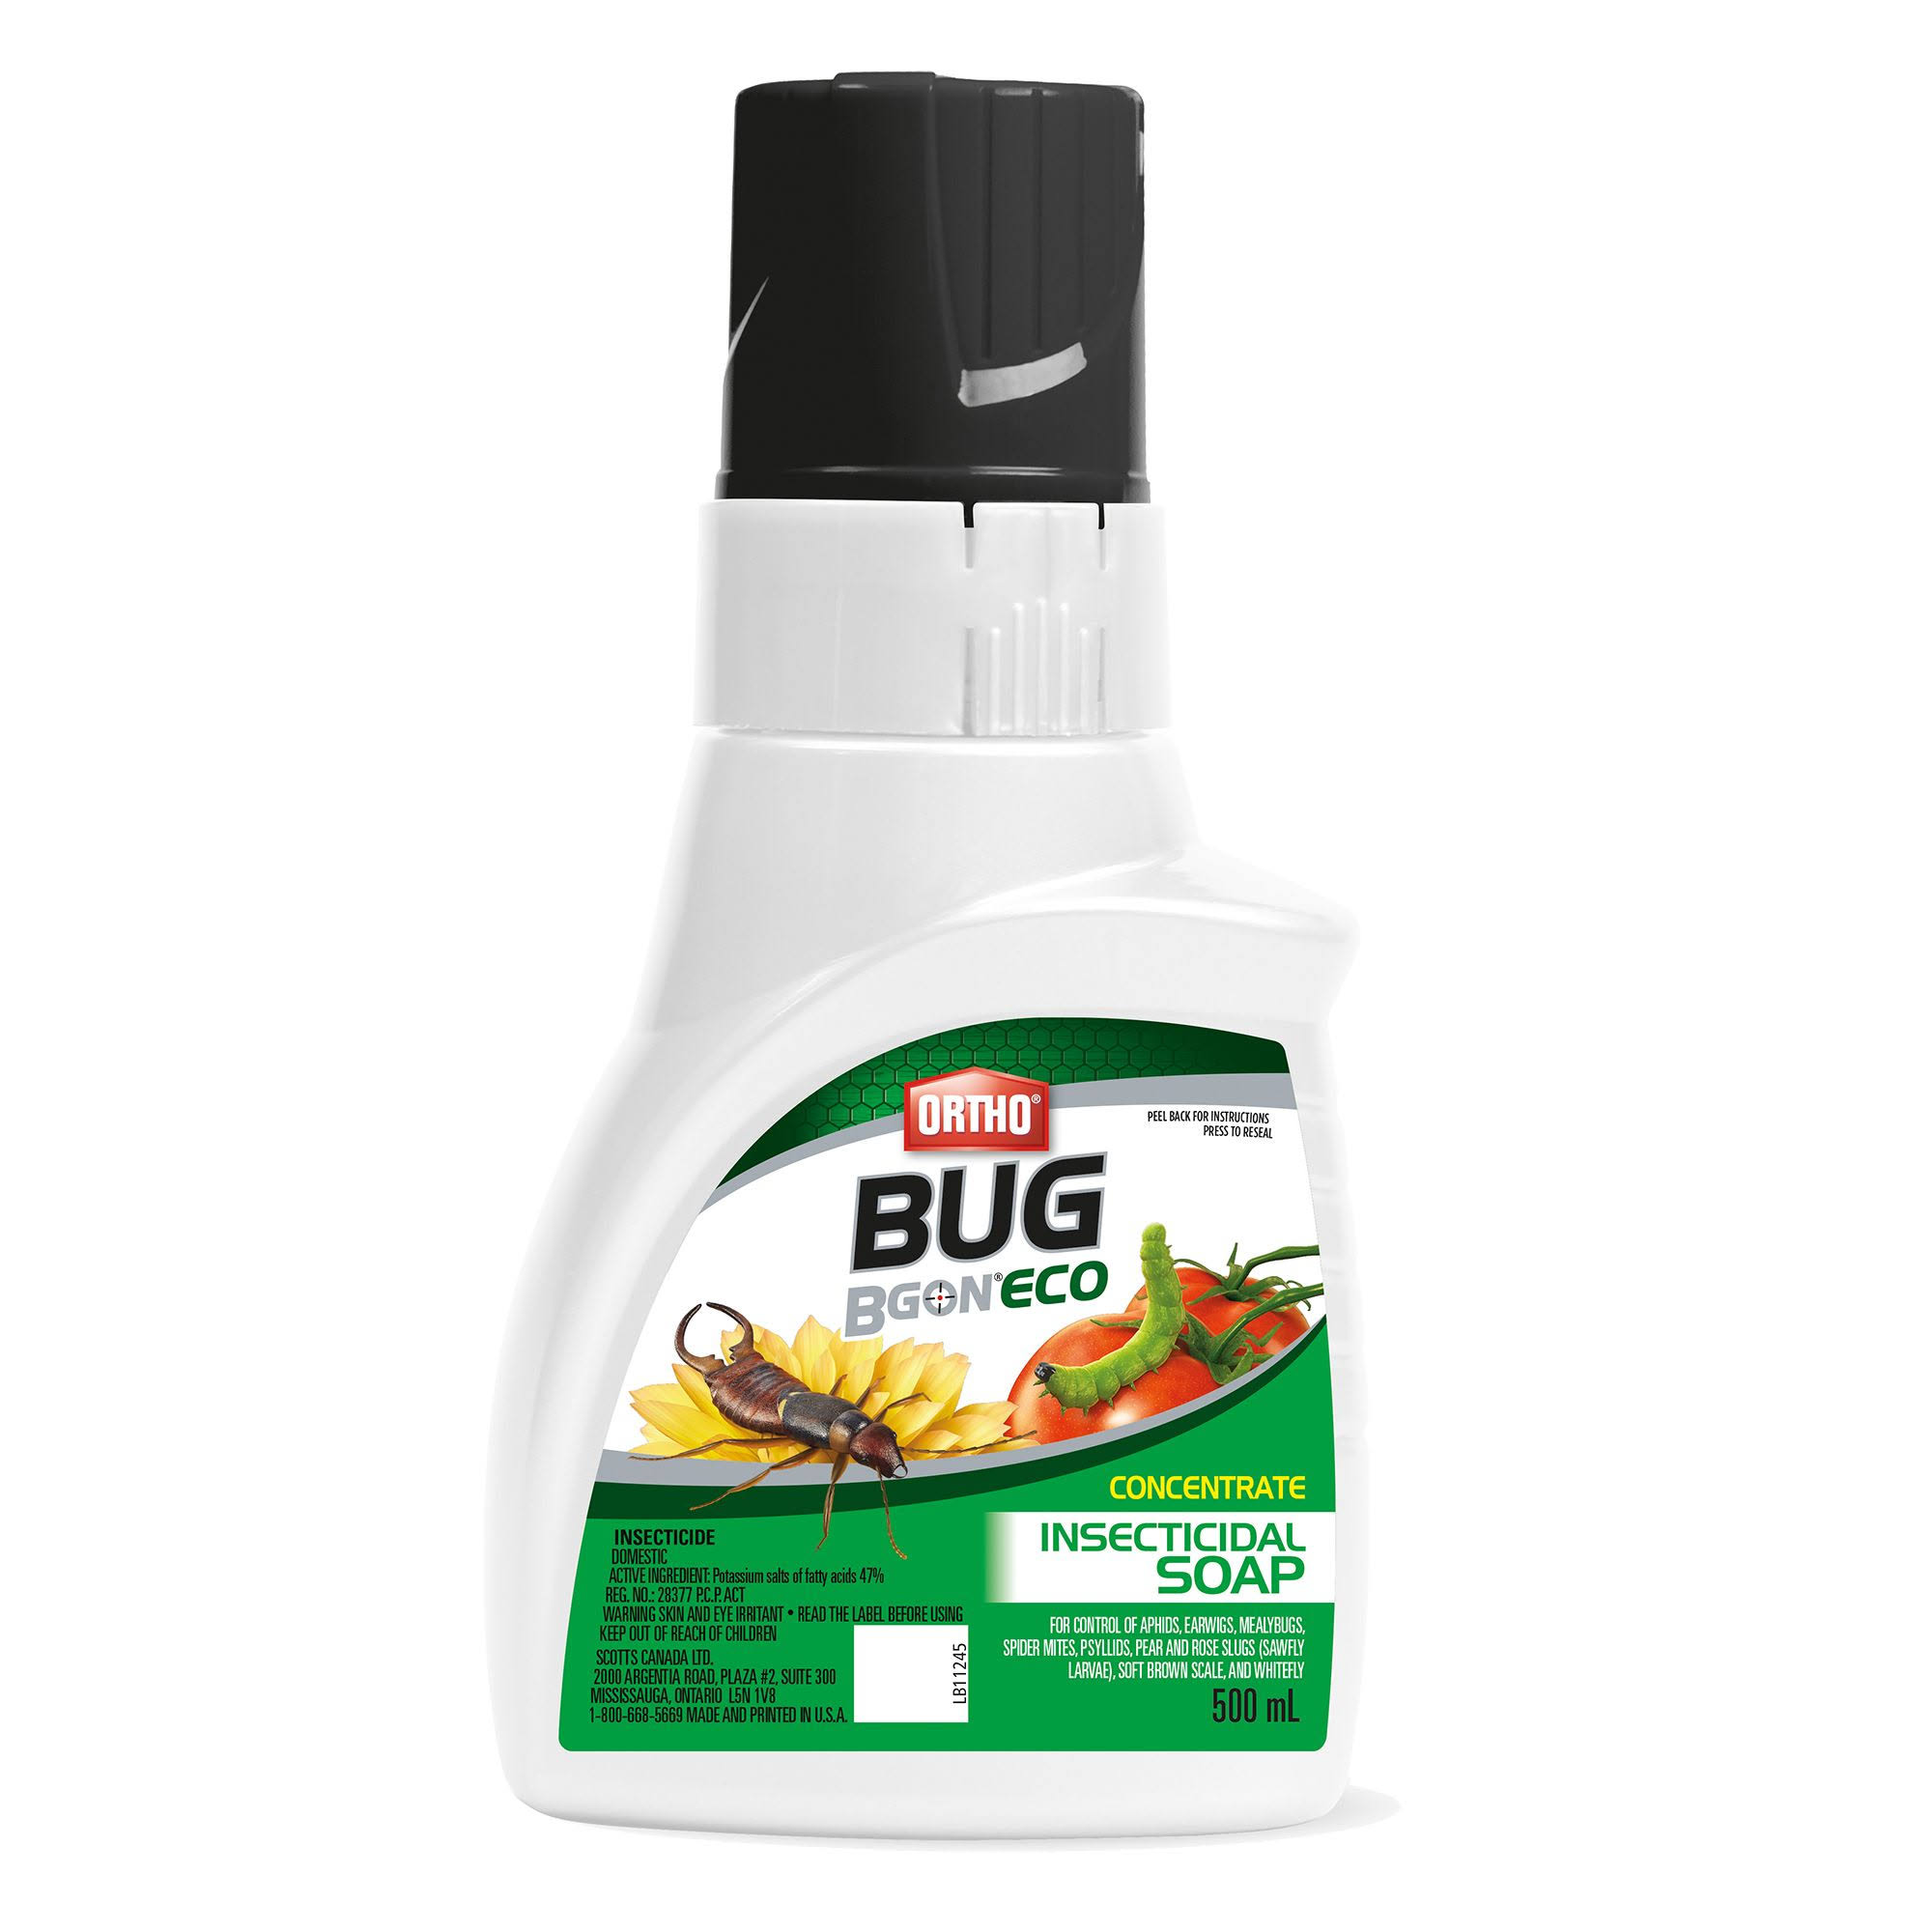 EcoSense Bug B Gon 0307010 Concentrated Crawling Insecticidal Soap - 500ml